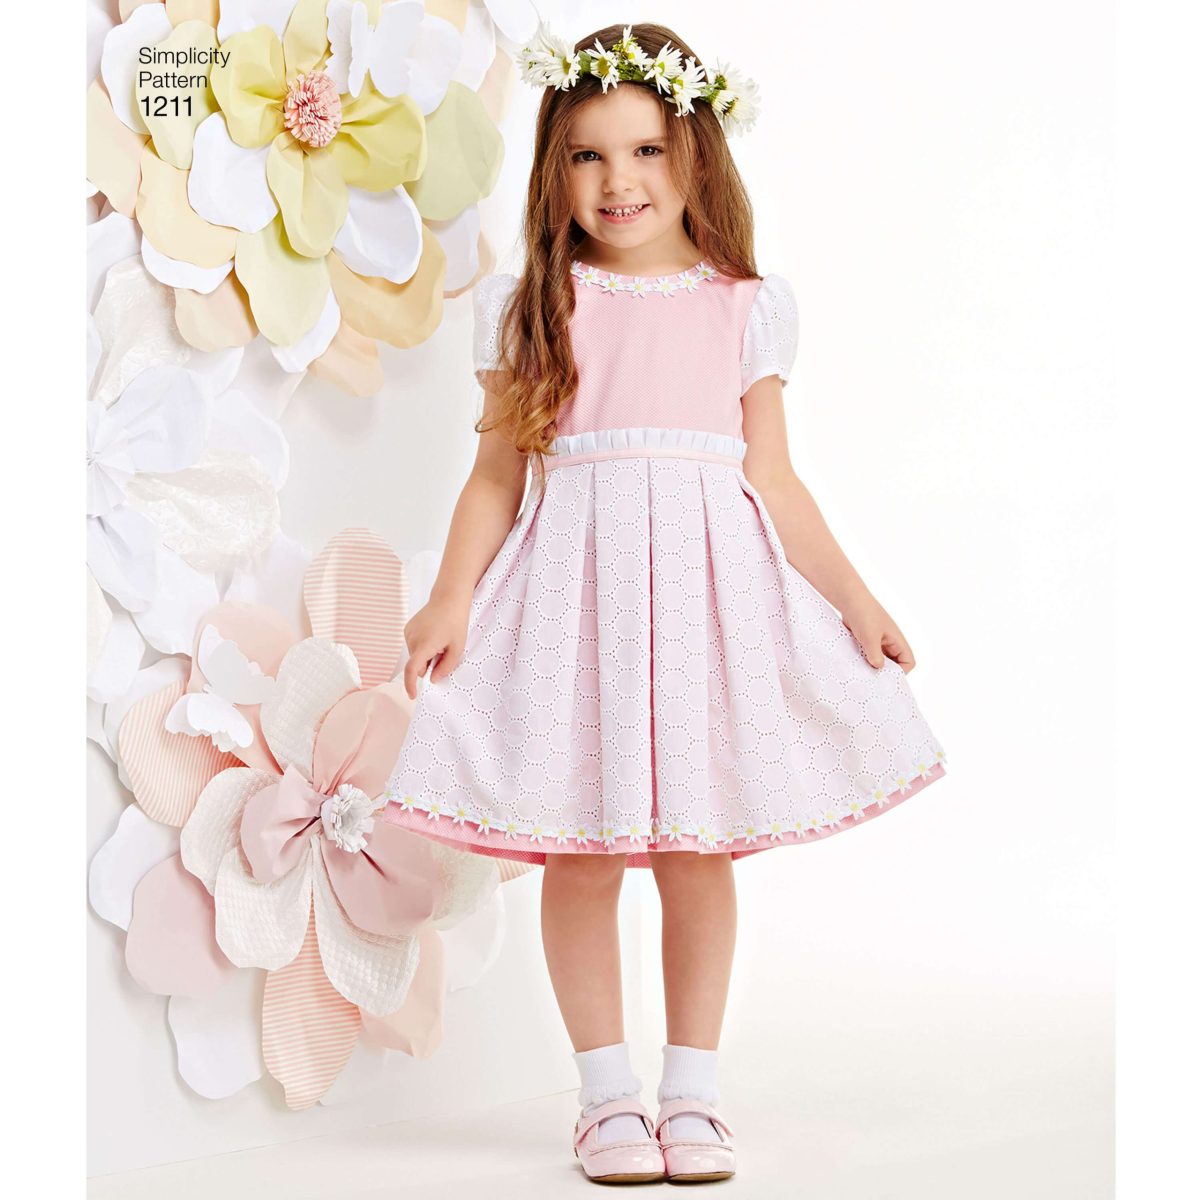 Simplicity Sewing Pattern 1211 Child's and Girls' Dress in two lengths